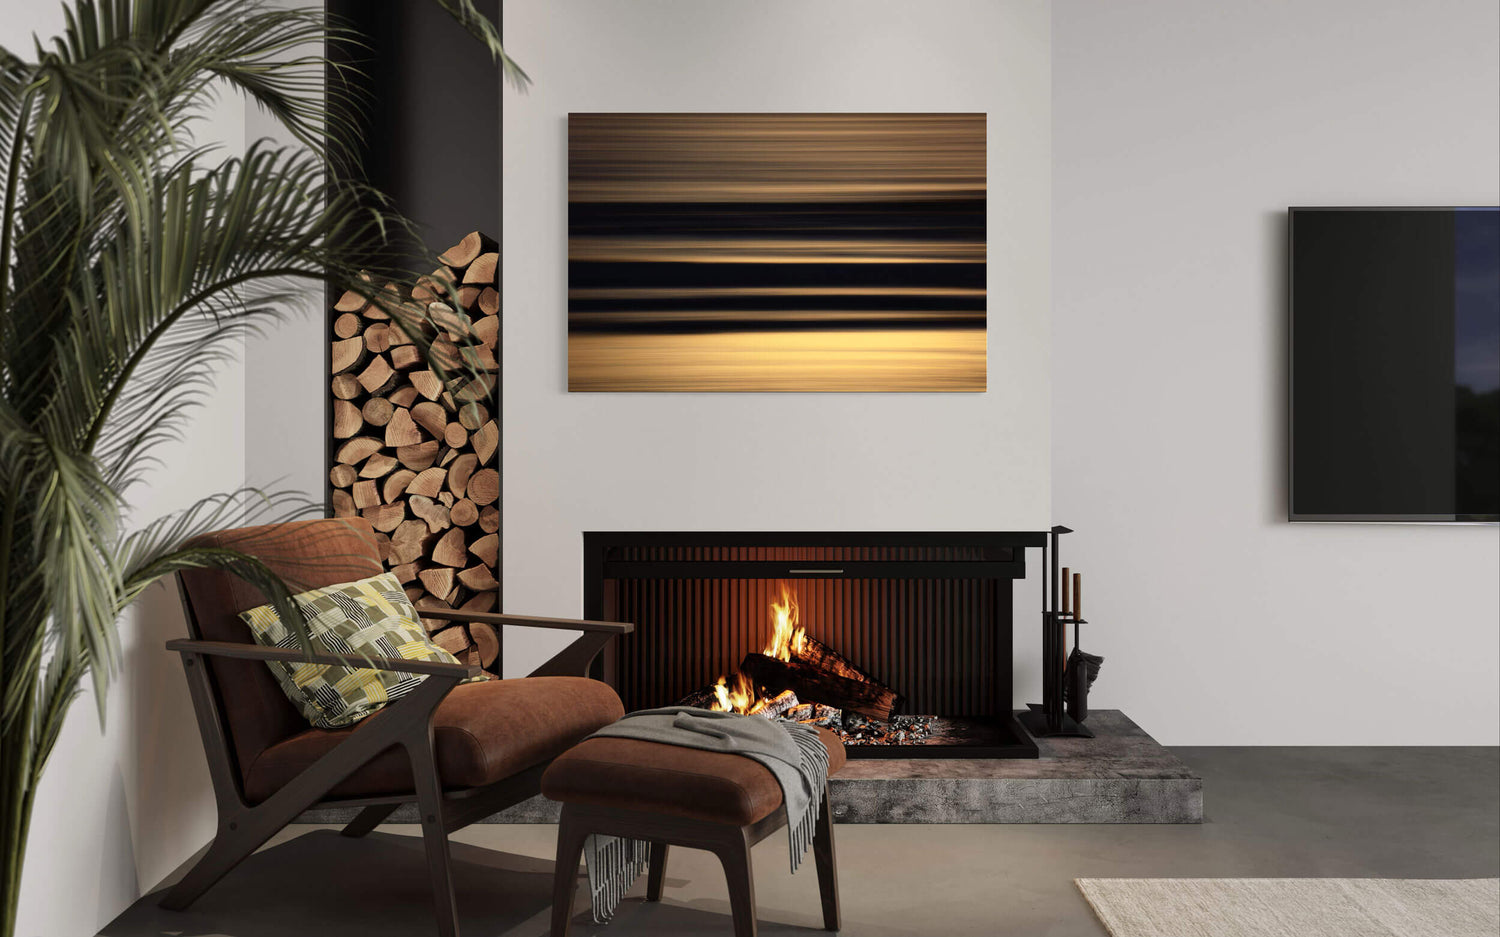 A piece of Cannon Beach art showing an abstract Oregon coast sunset hangs in a living room.